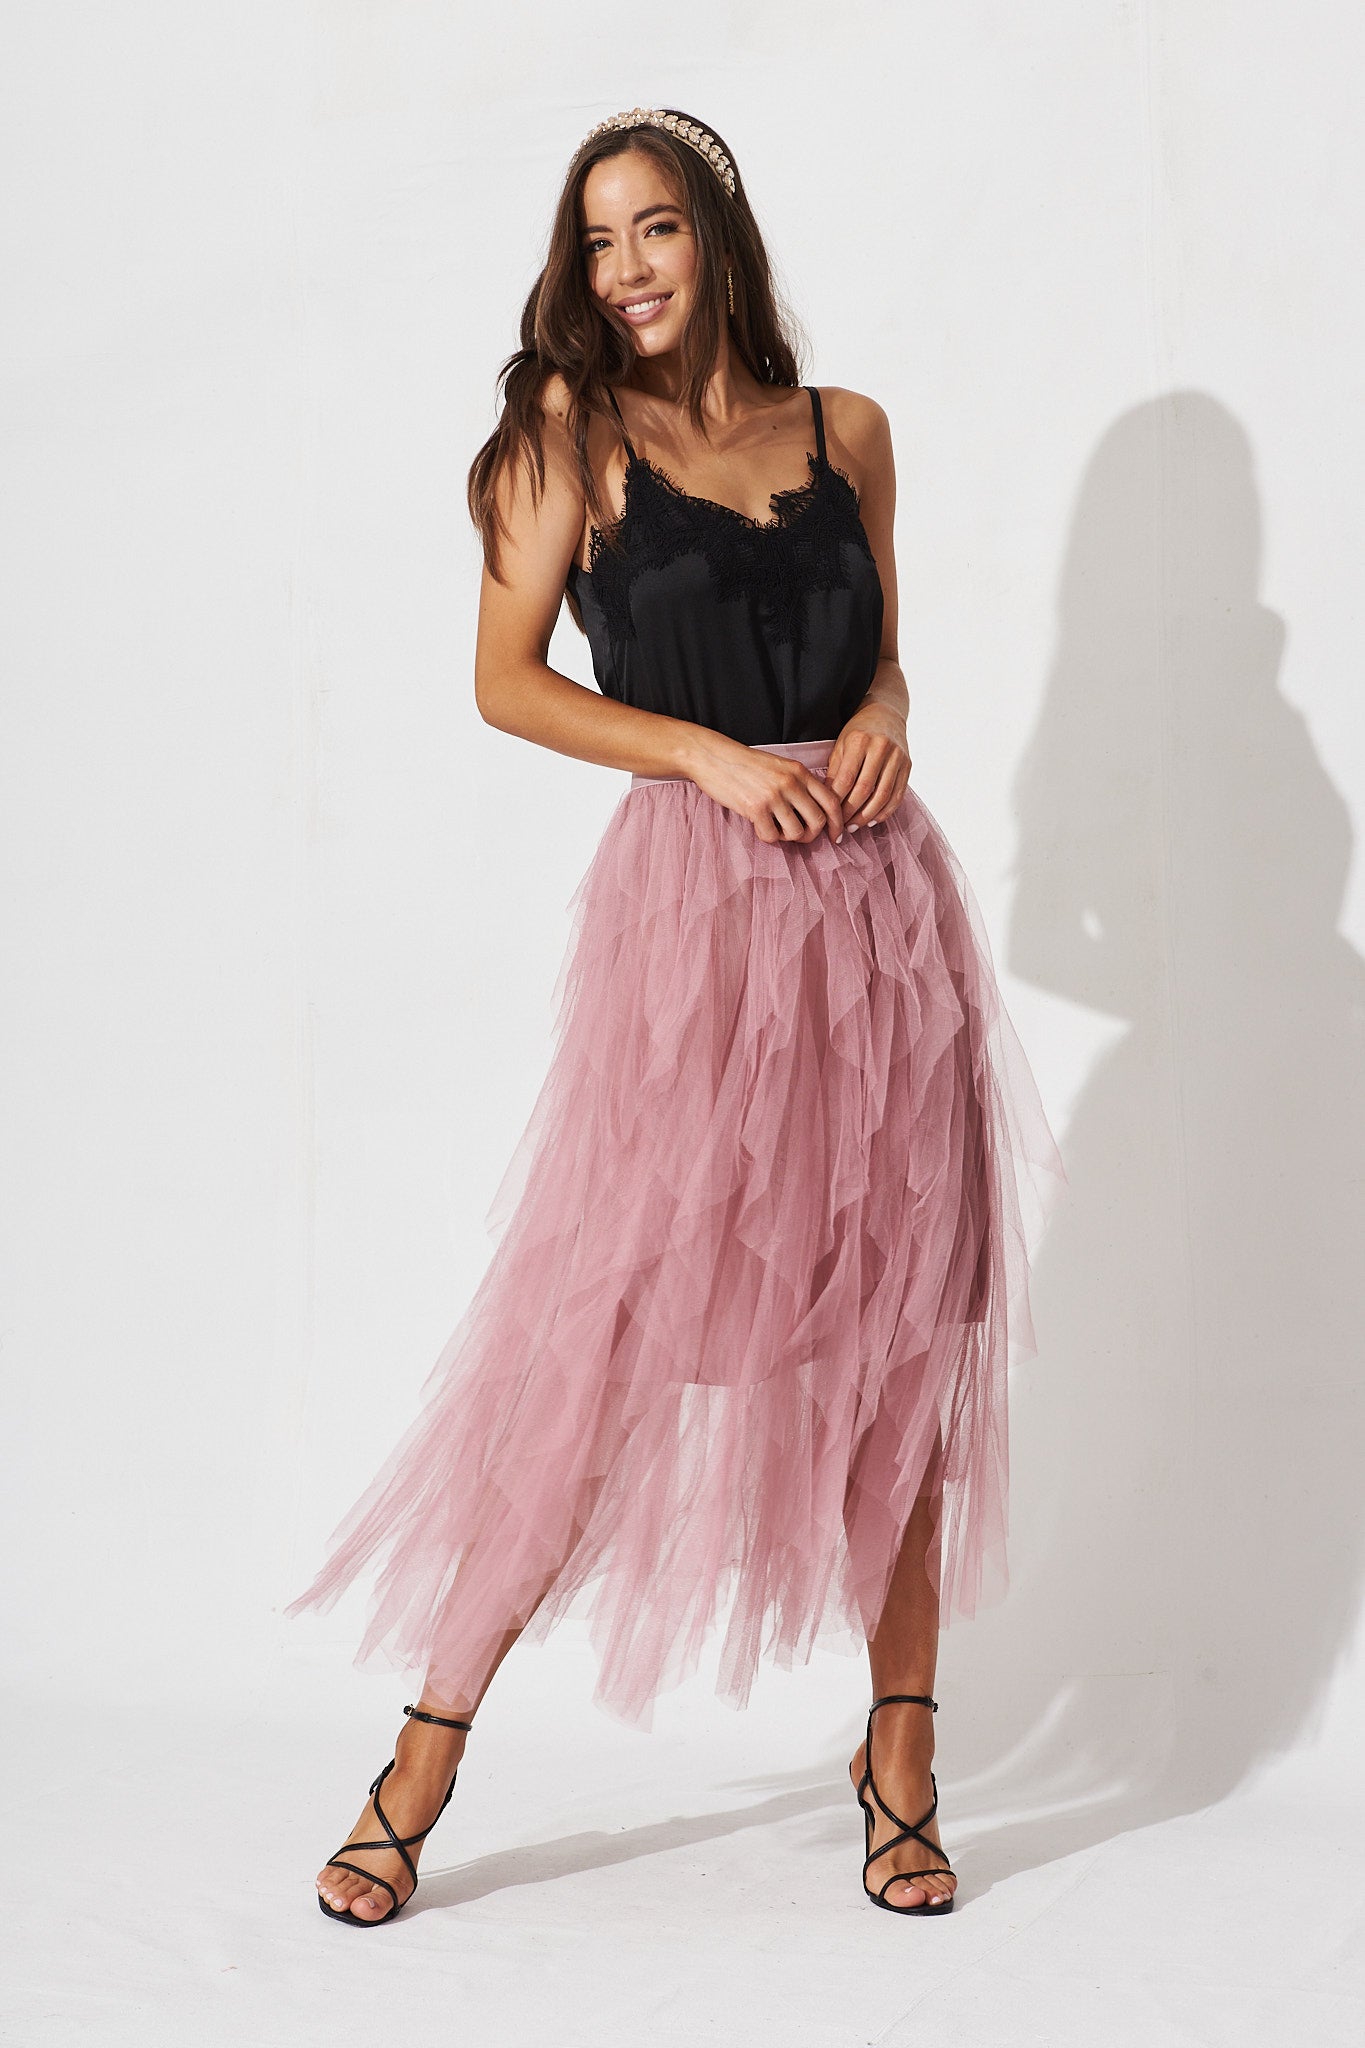 High Quality Emerald Black High Low Tiered Tulle Skirts Women